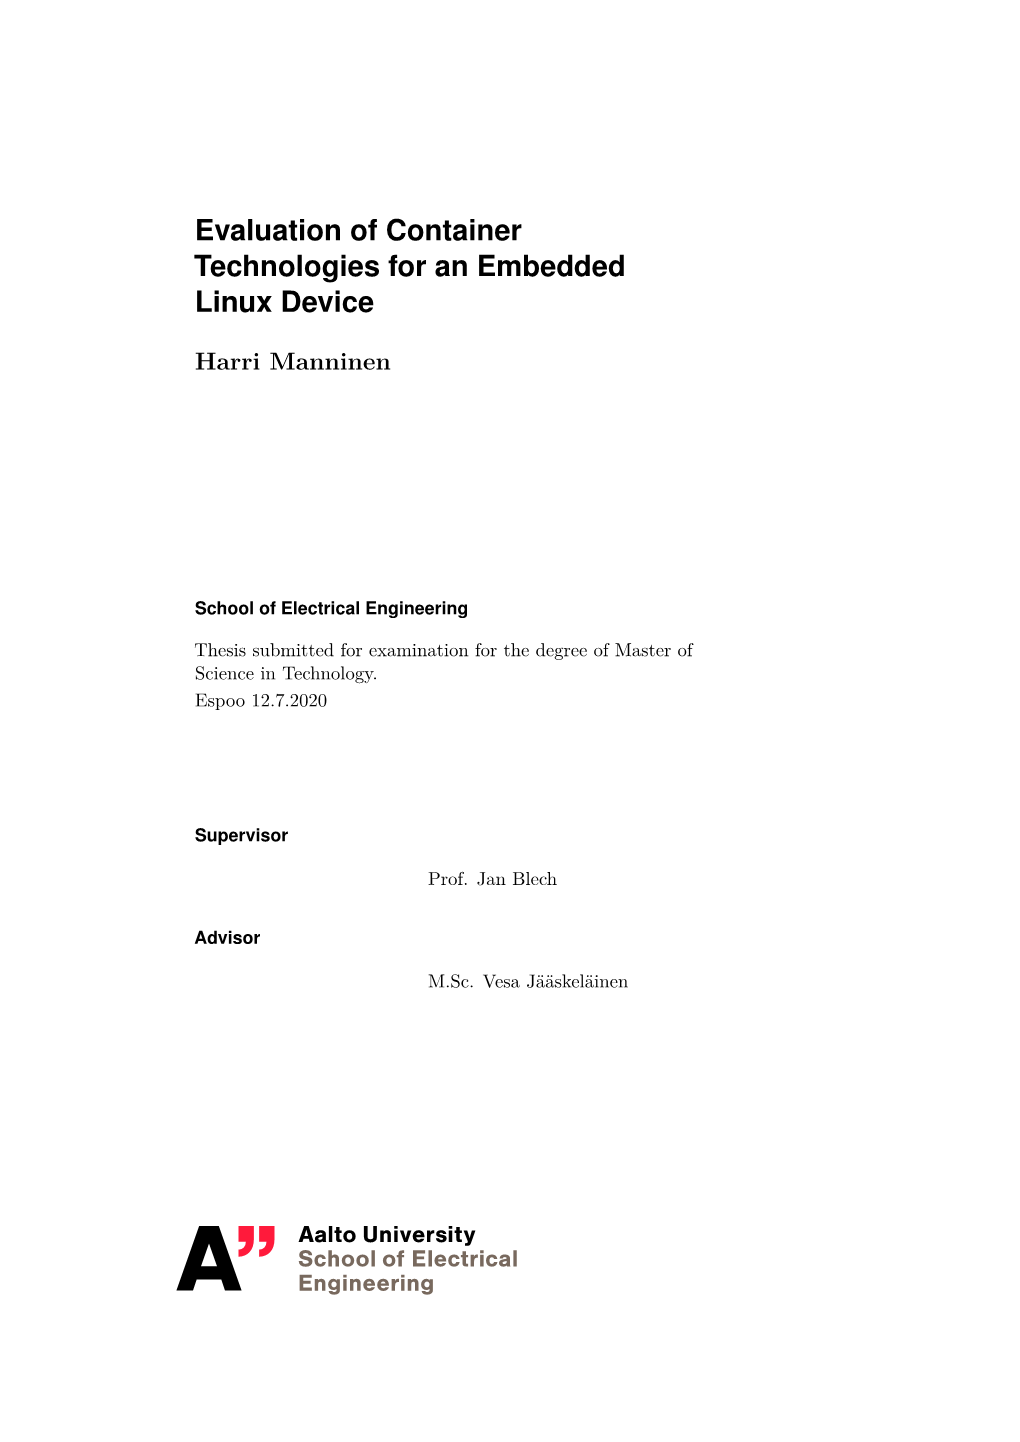 Evaluation of Container Technologies for an Embedded Linux Device